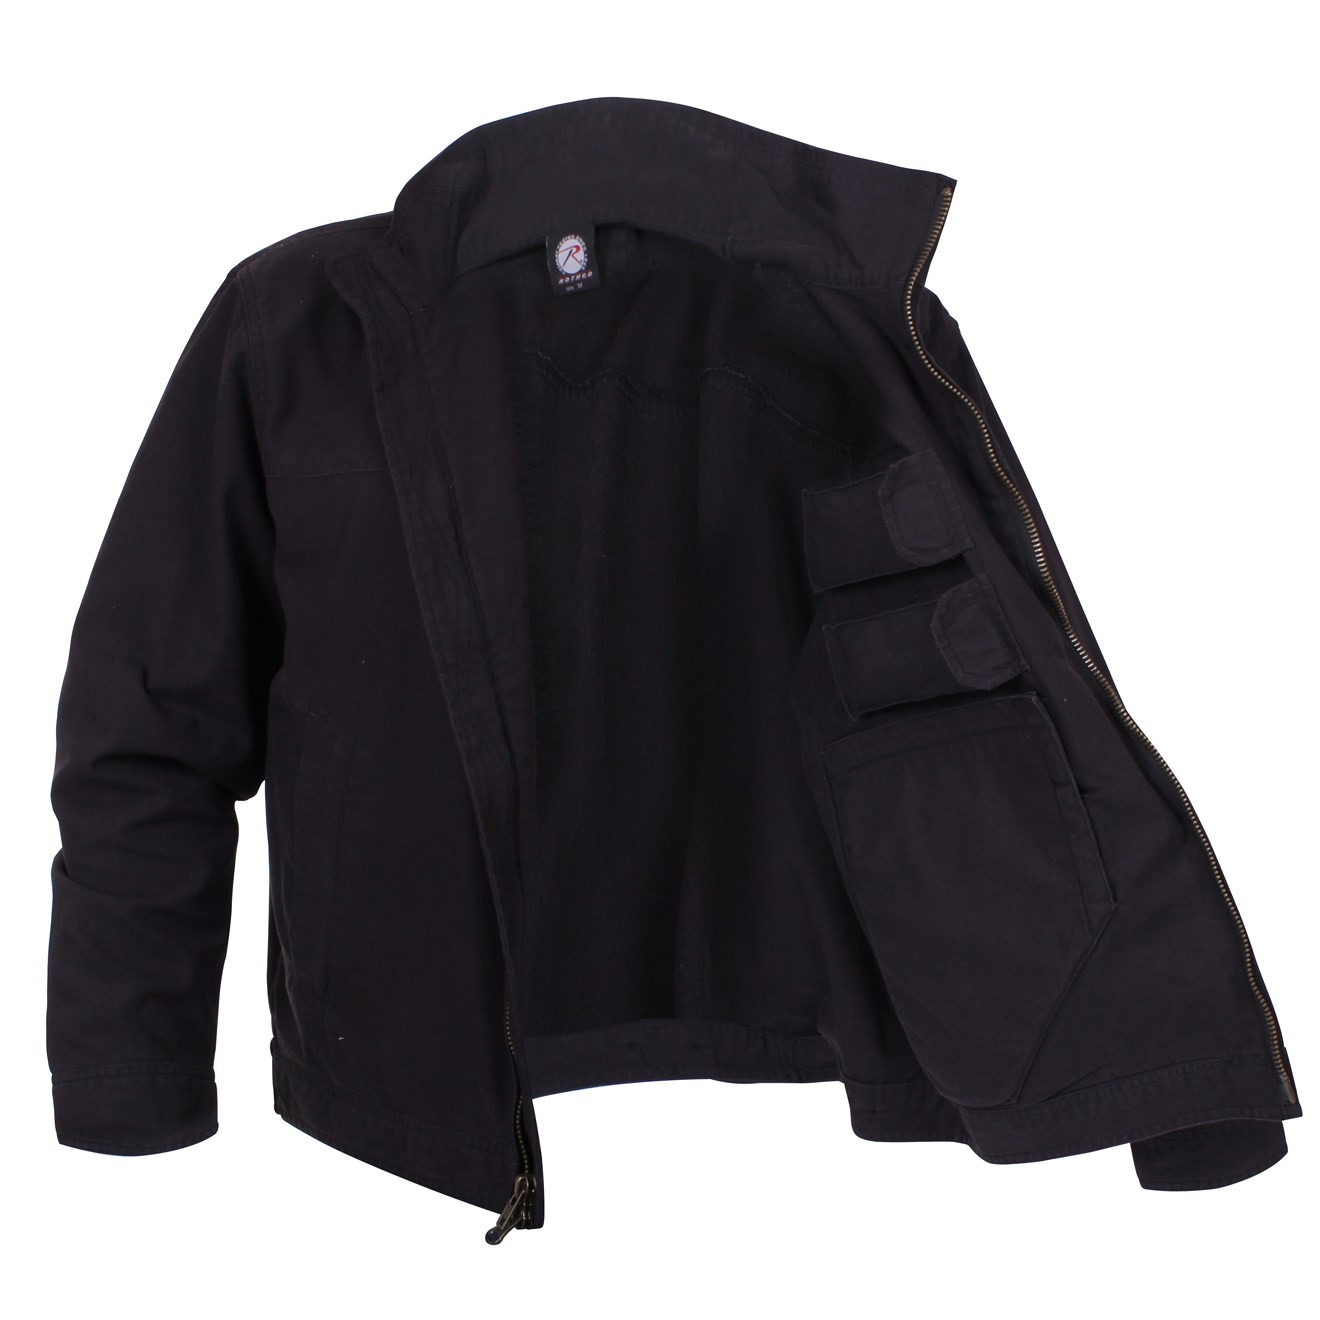 Lightweight Concealed Carry Jacket BLACK ROTHCO 59585 L-11